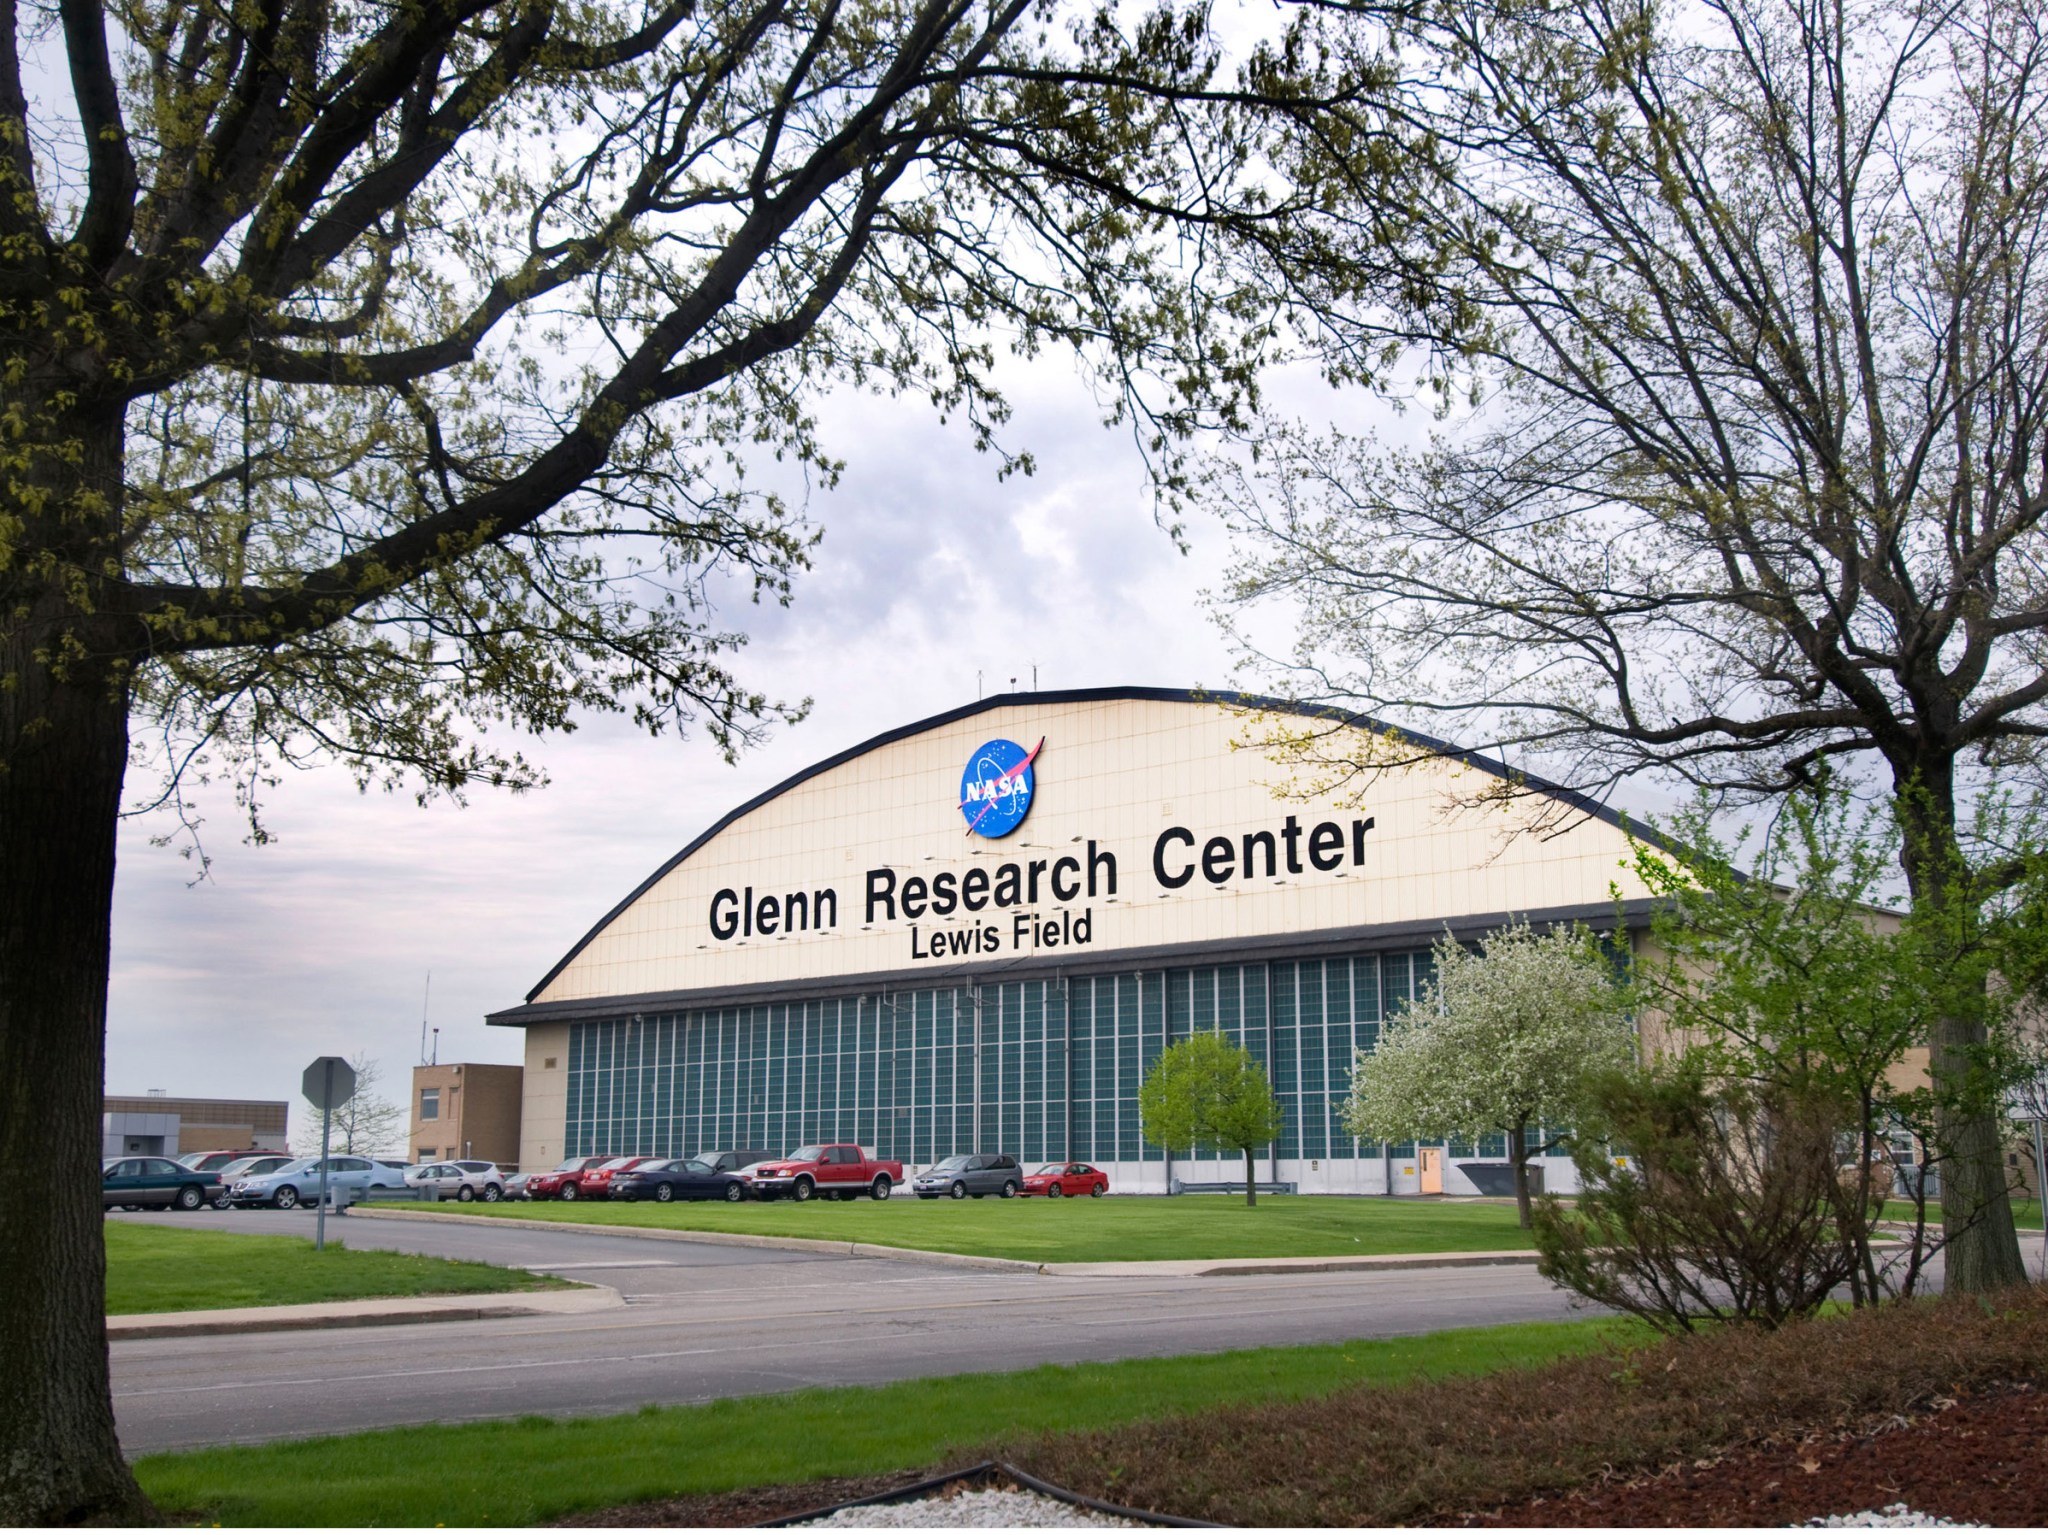 Glenn Research Center hangar as viewed from the front